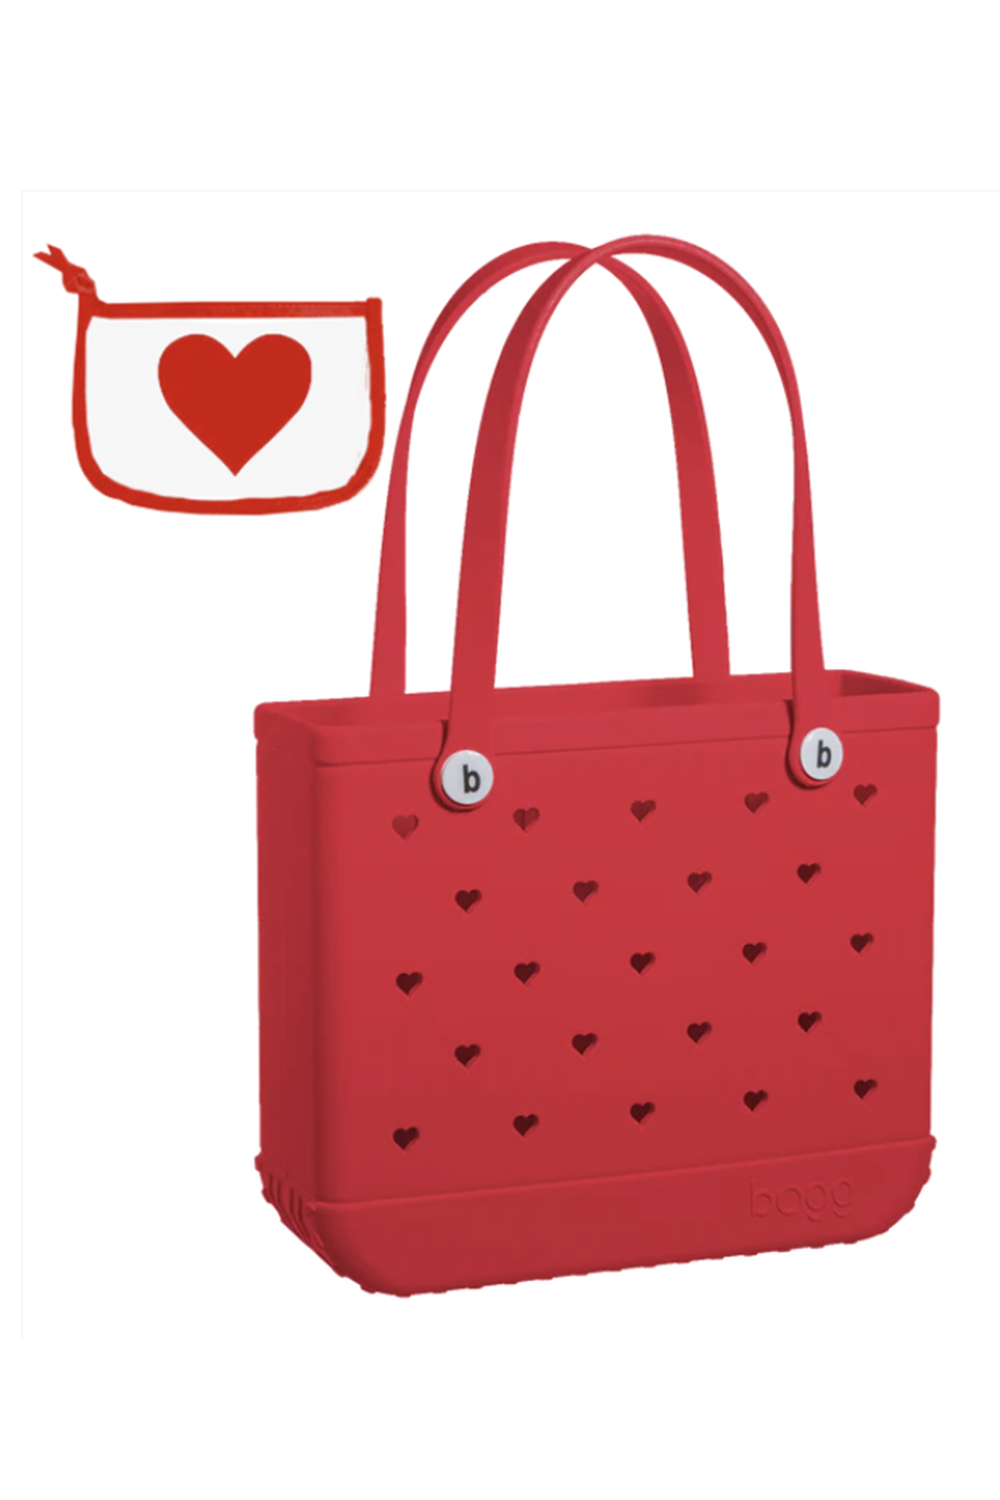 Bogg Bag - HEART Bright Red